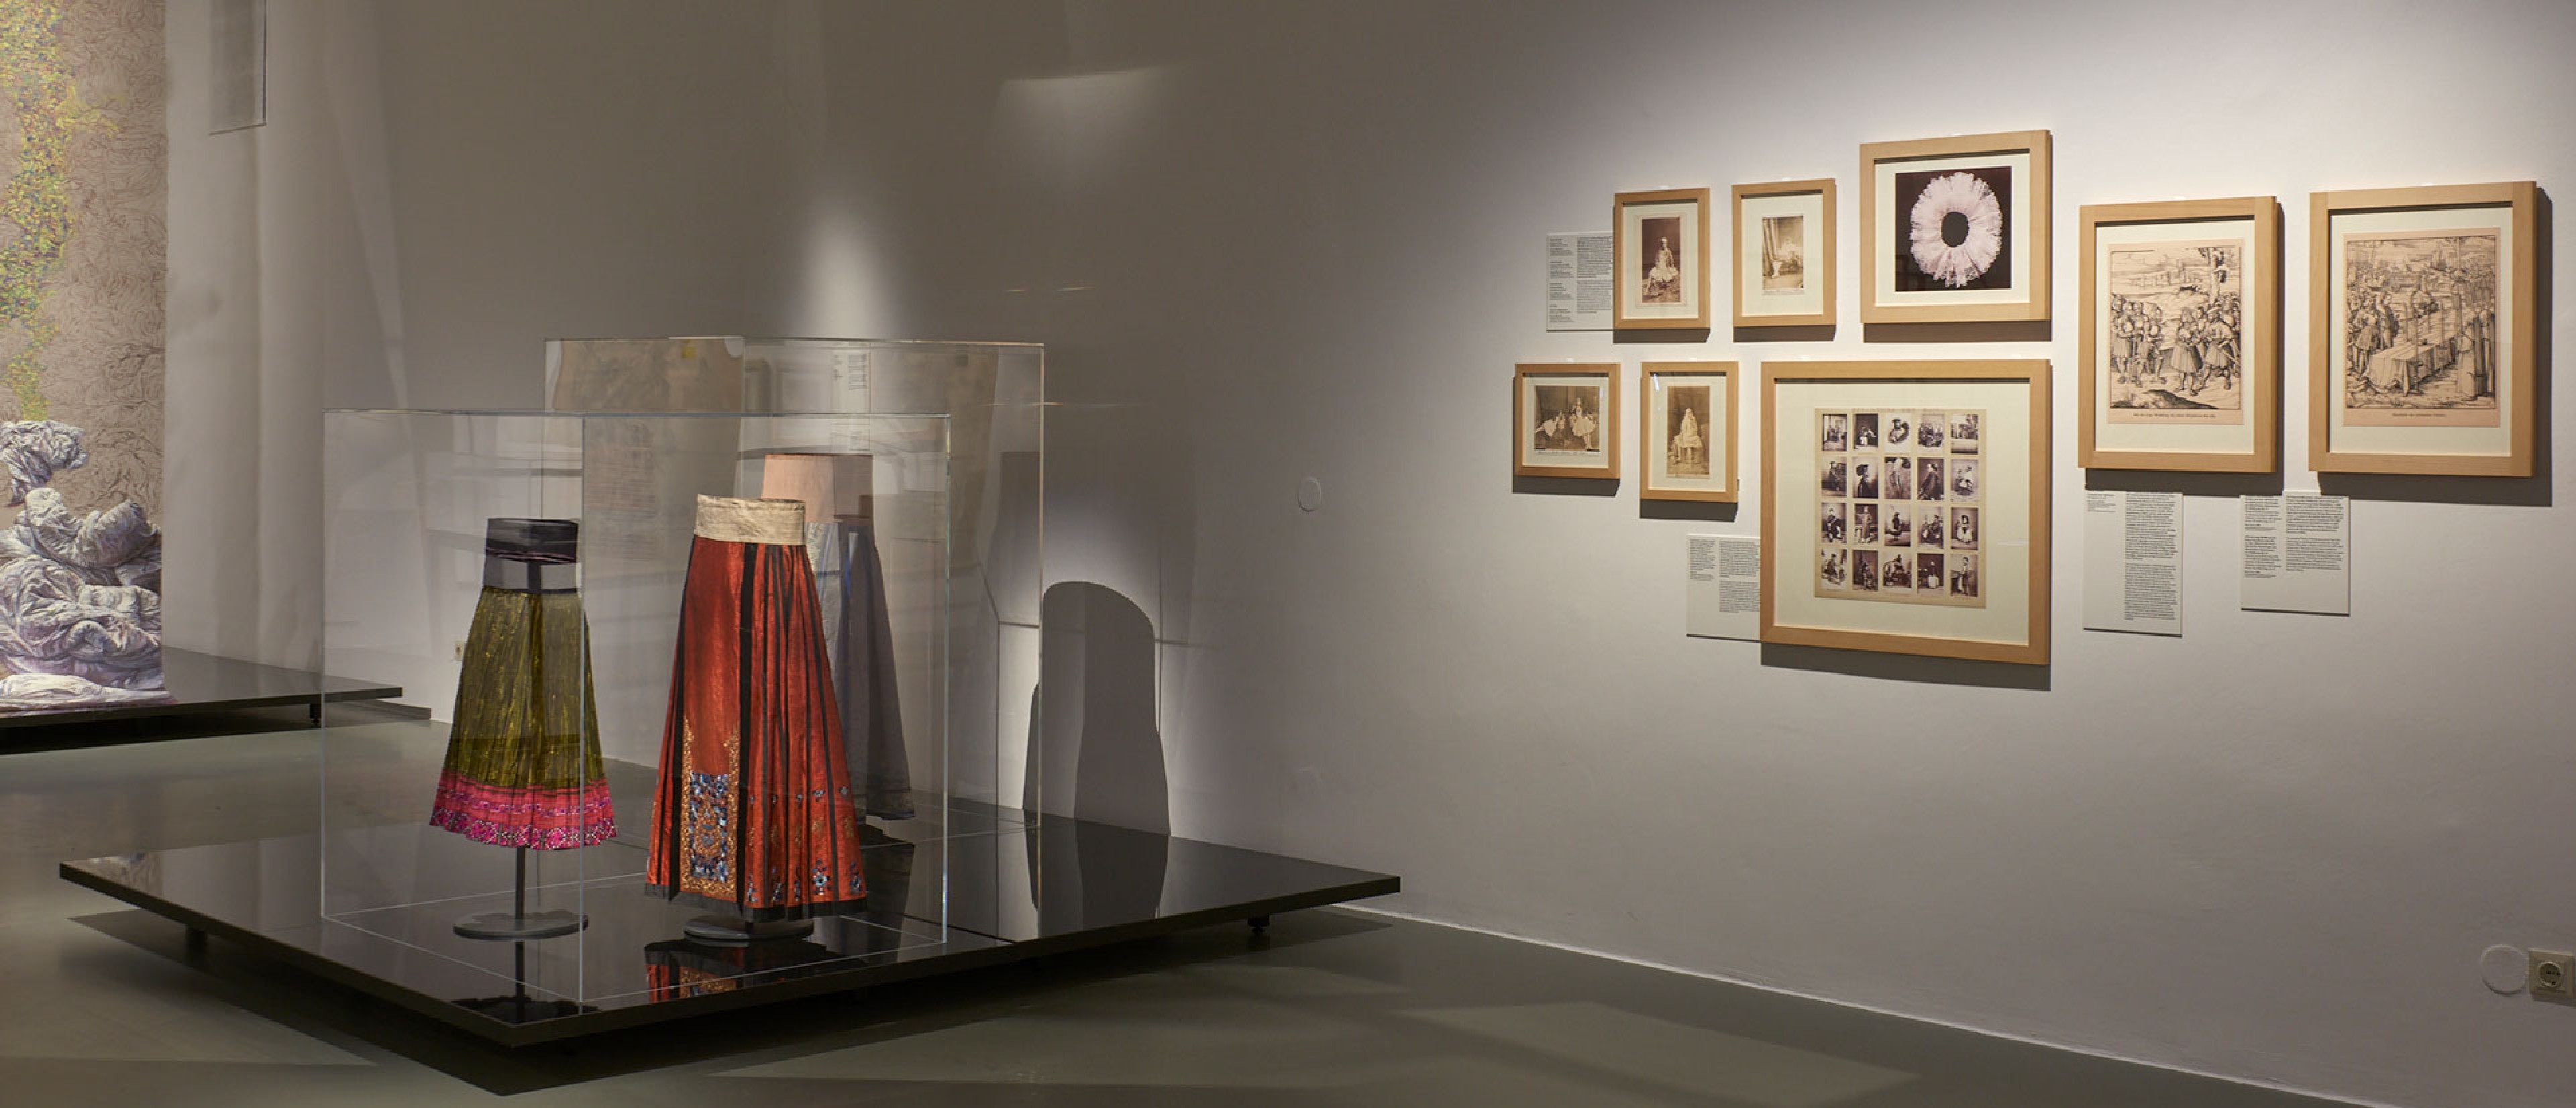 Exhibition space with objects: Pleated skirts, painting, photographs on the walls.